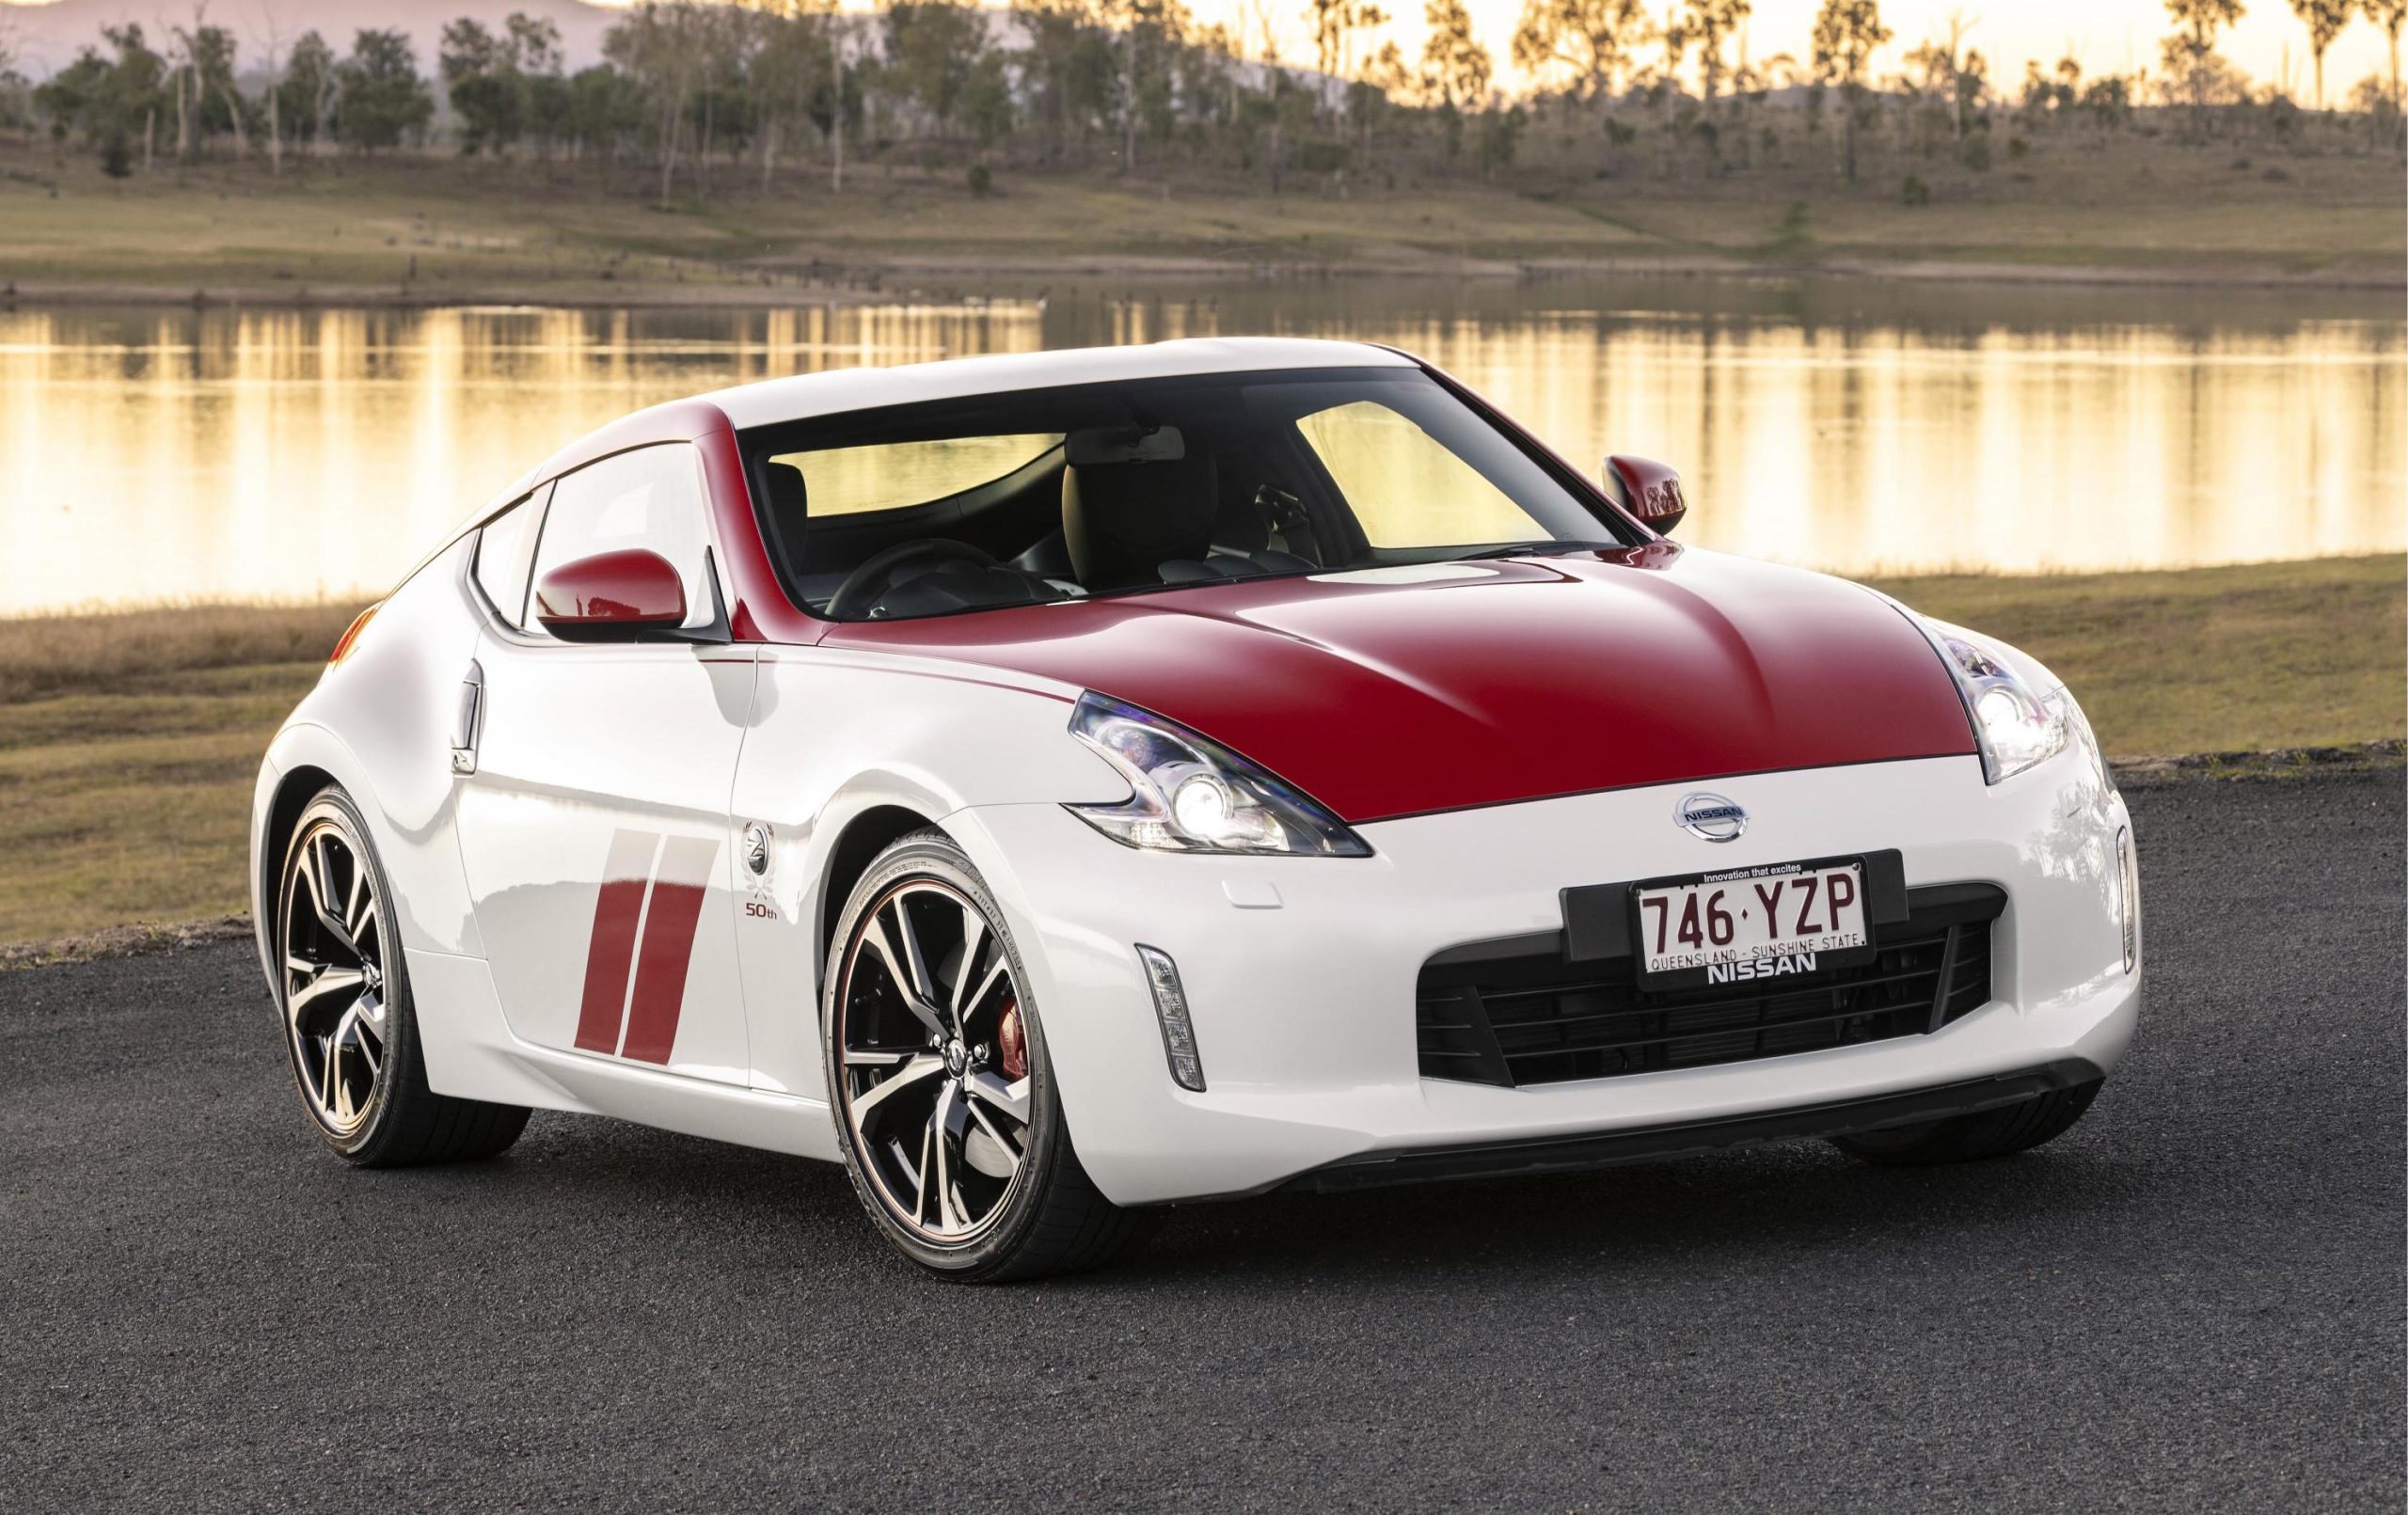 2020 Nissan 370Z 50th Anniversary edition now on sale in Australia